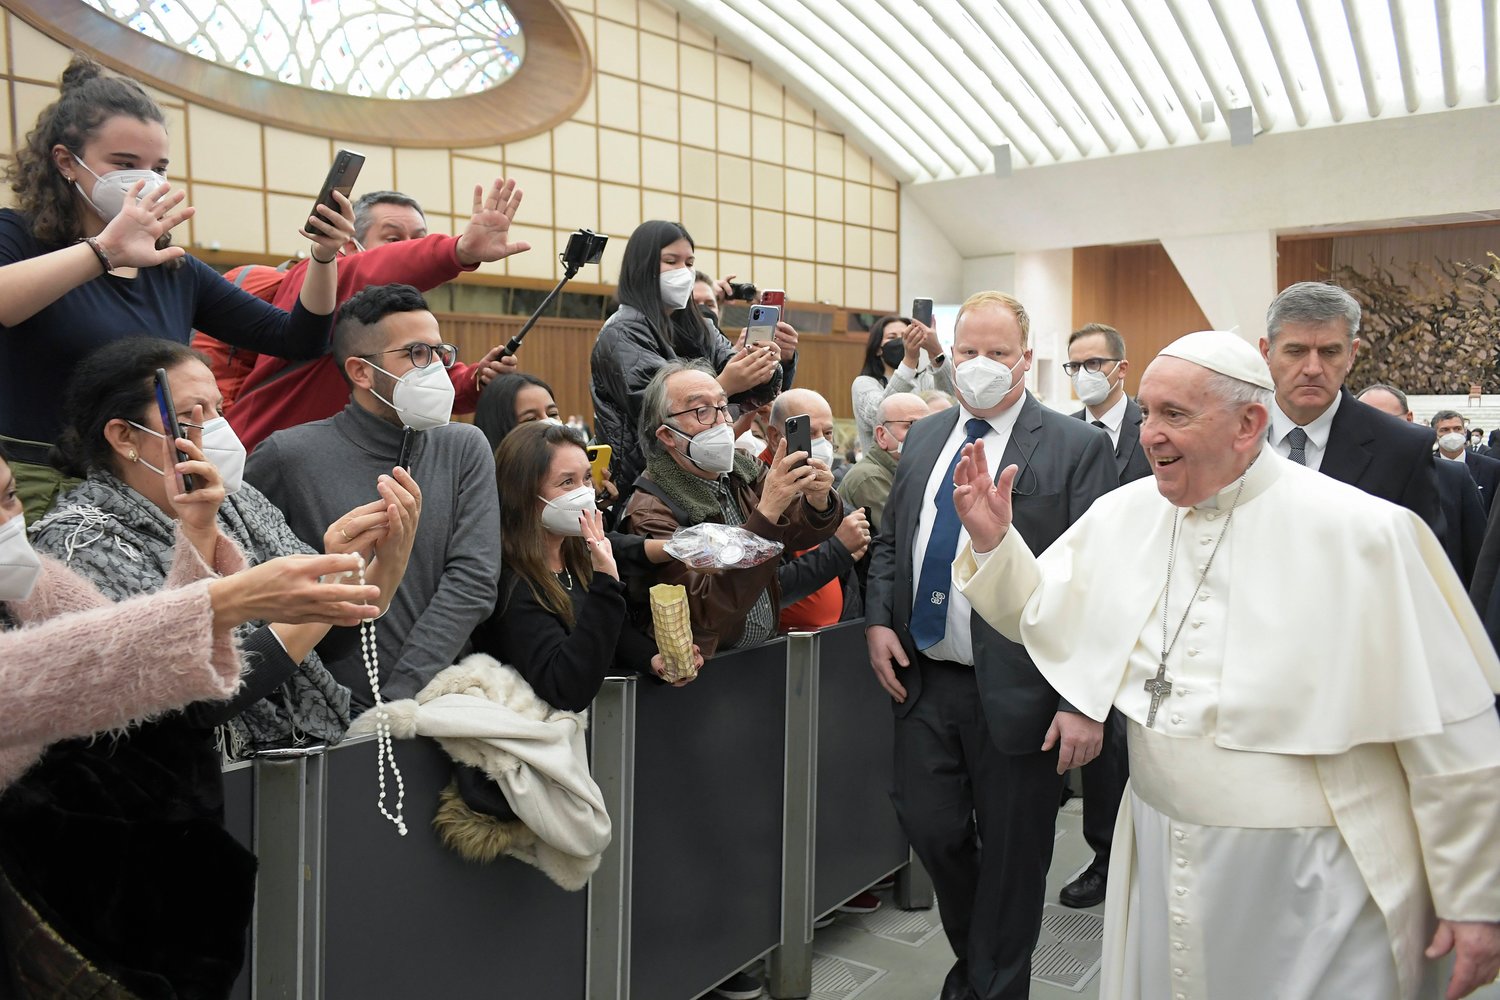 Pope Francis greets people during his general audience in the Paul VI hall at the Vatican Feb. 9, 2022. (CNS photo/Vatican Media)